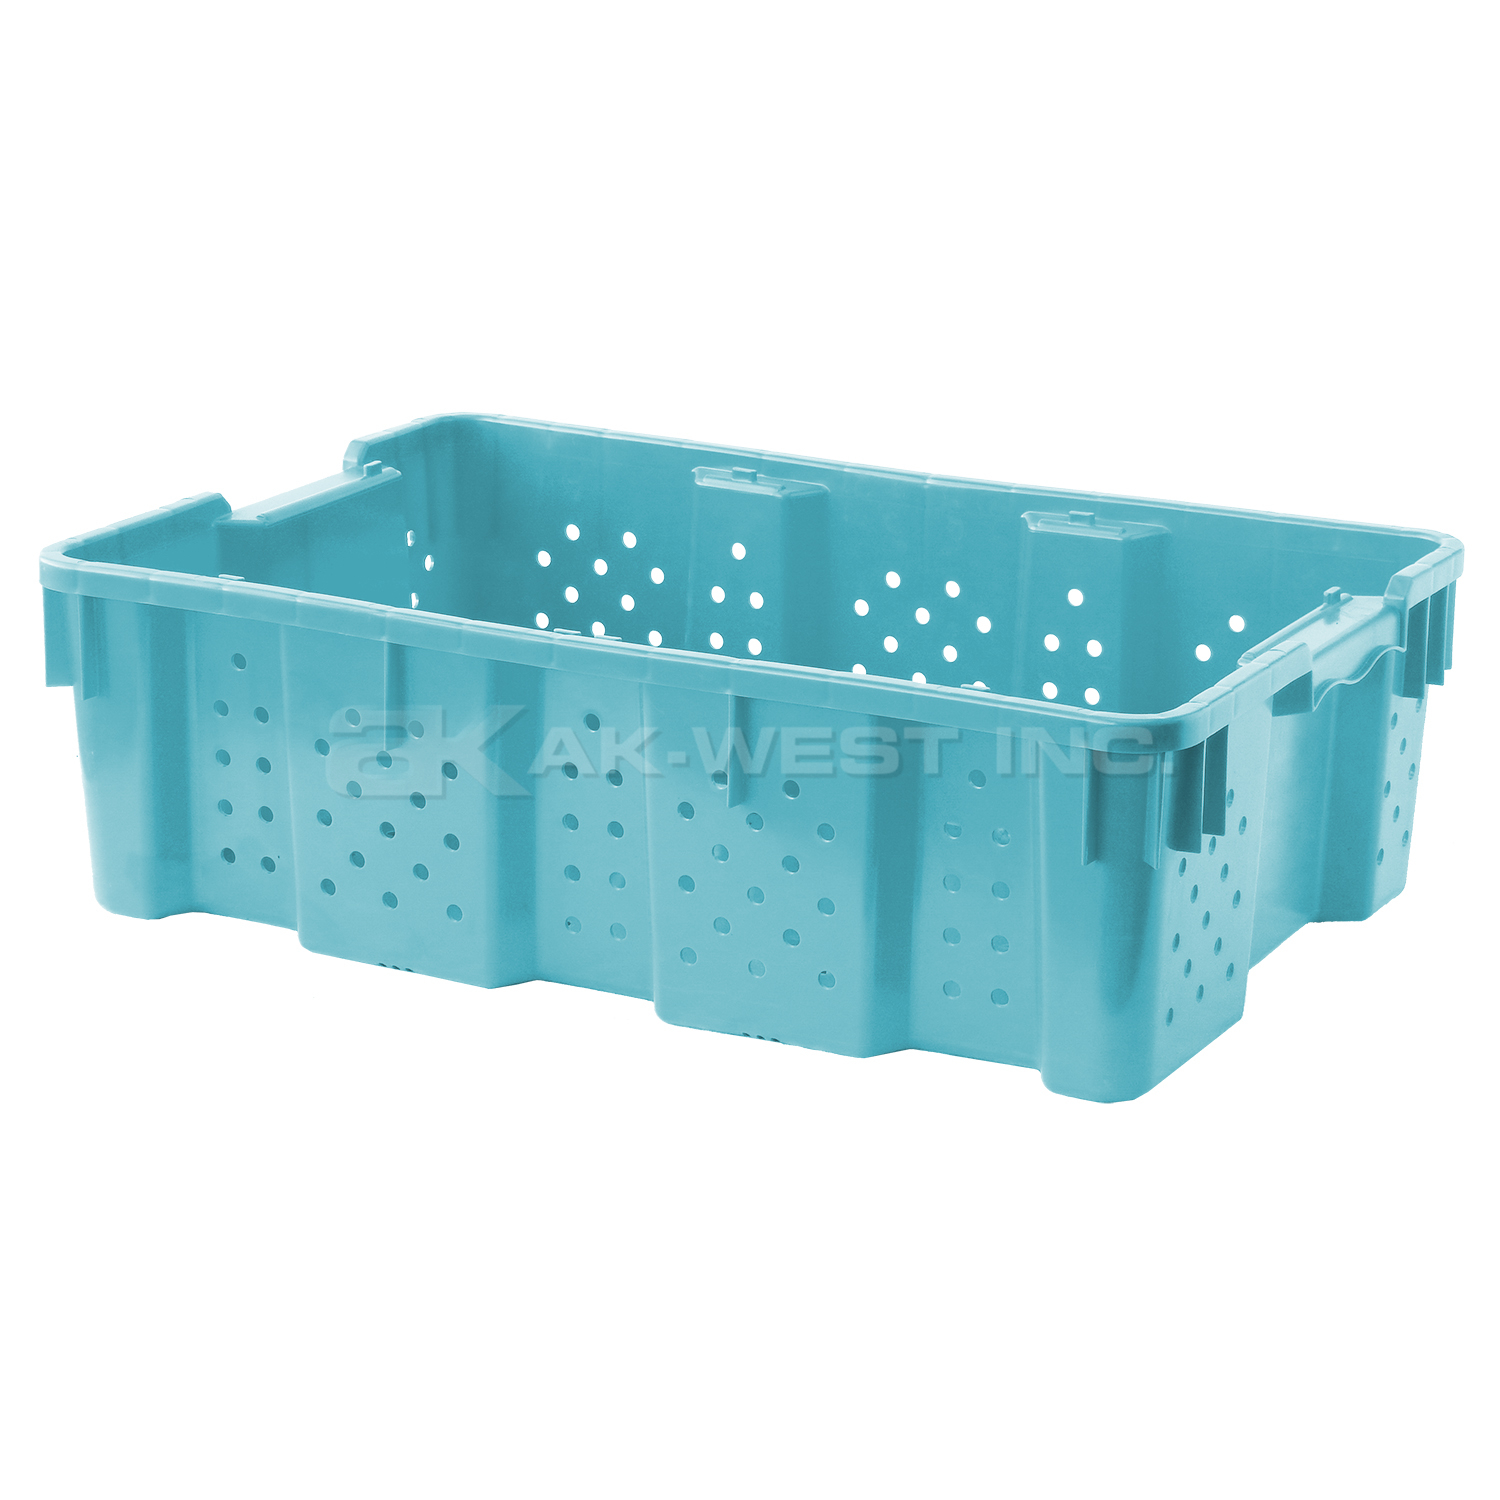 Lt. Blue, 24"L x 16"W x 7"H Stack and Nest Container w/ Vented Sides and Base